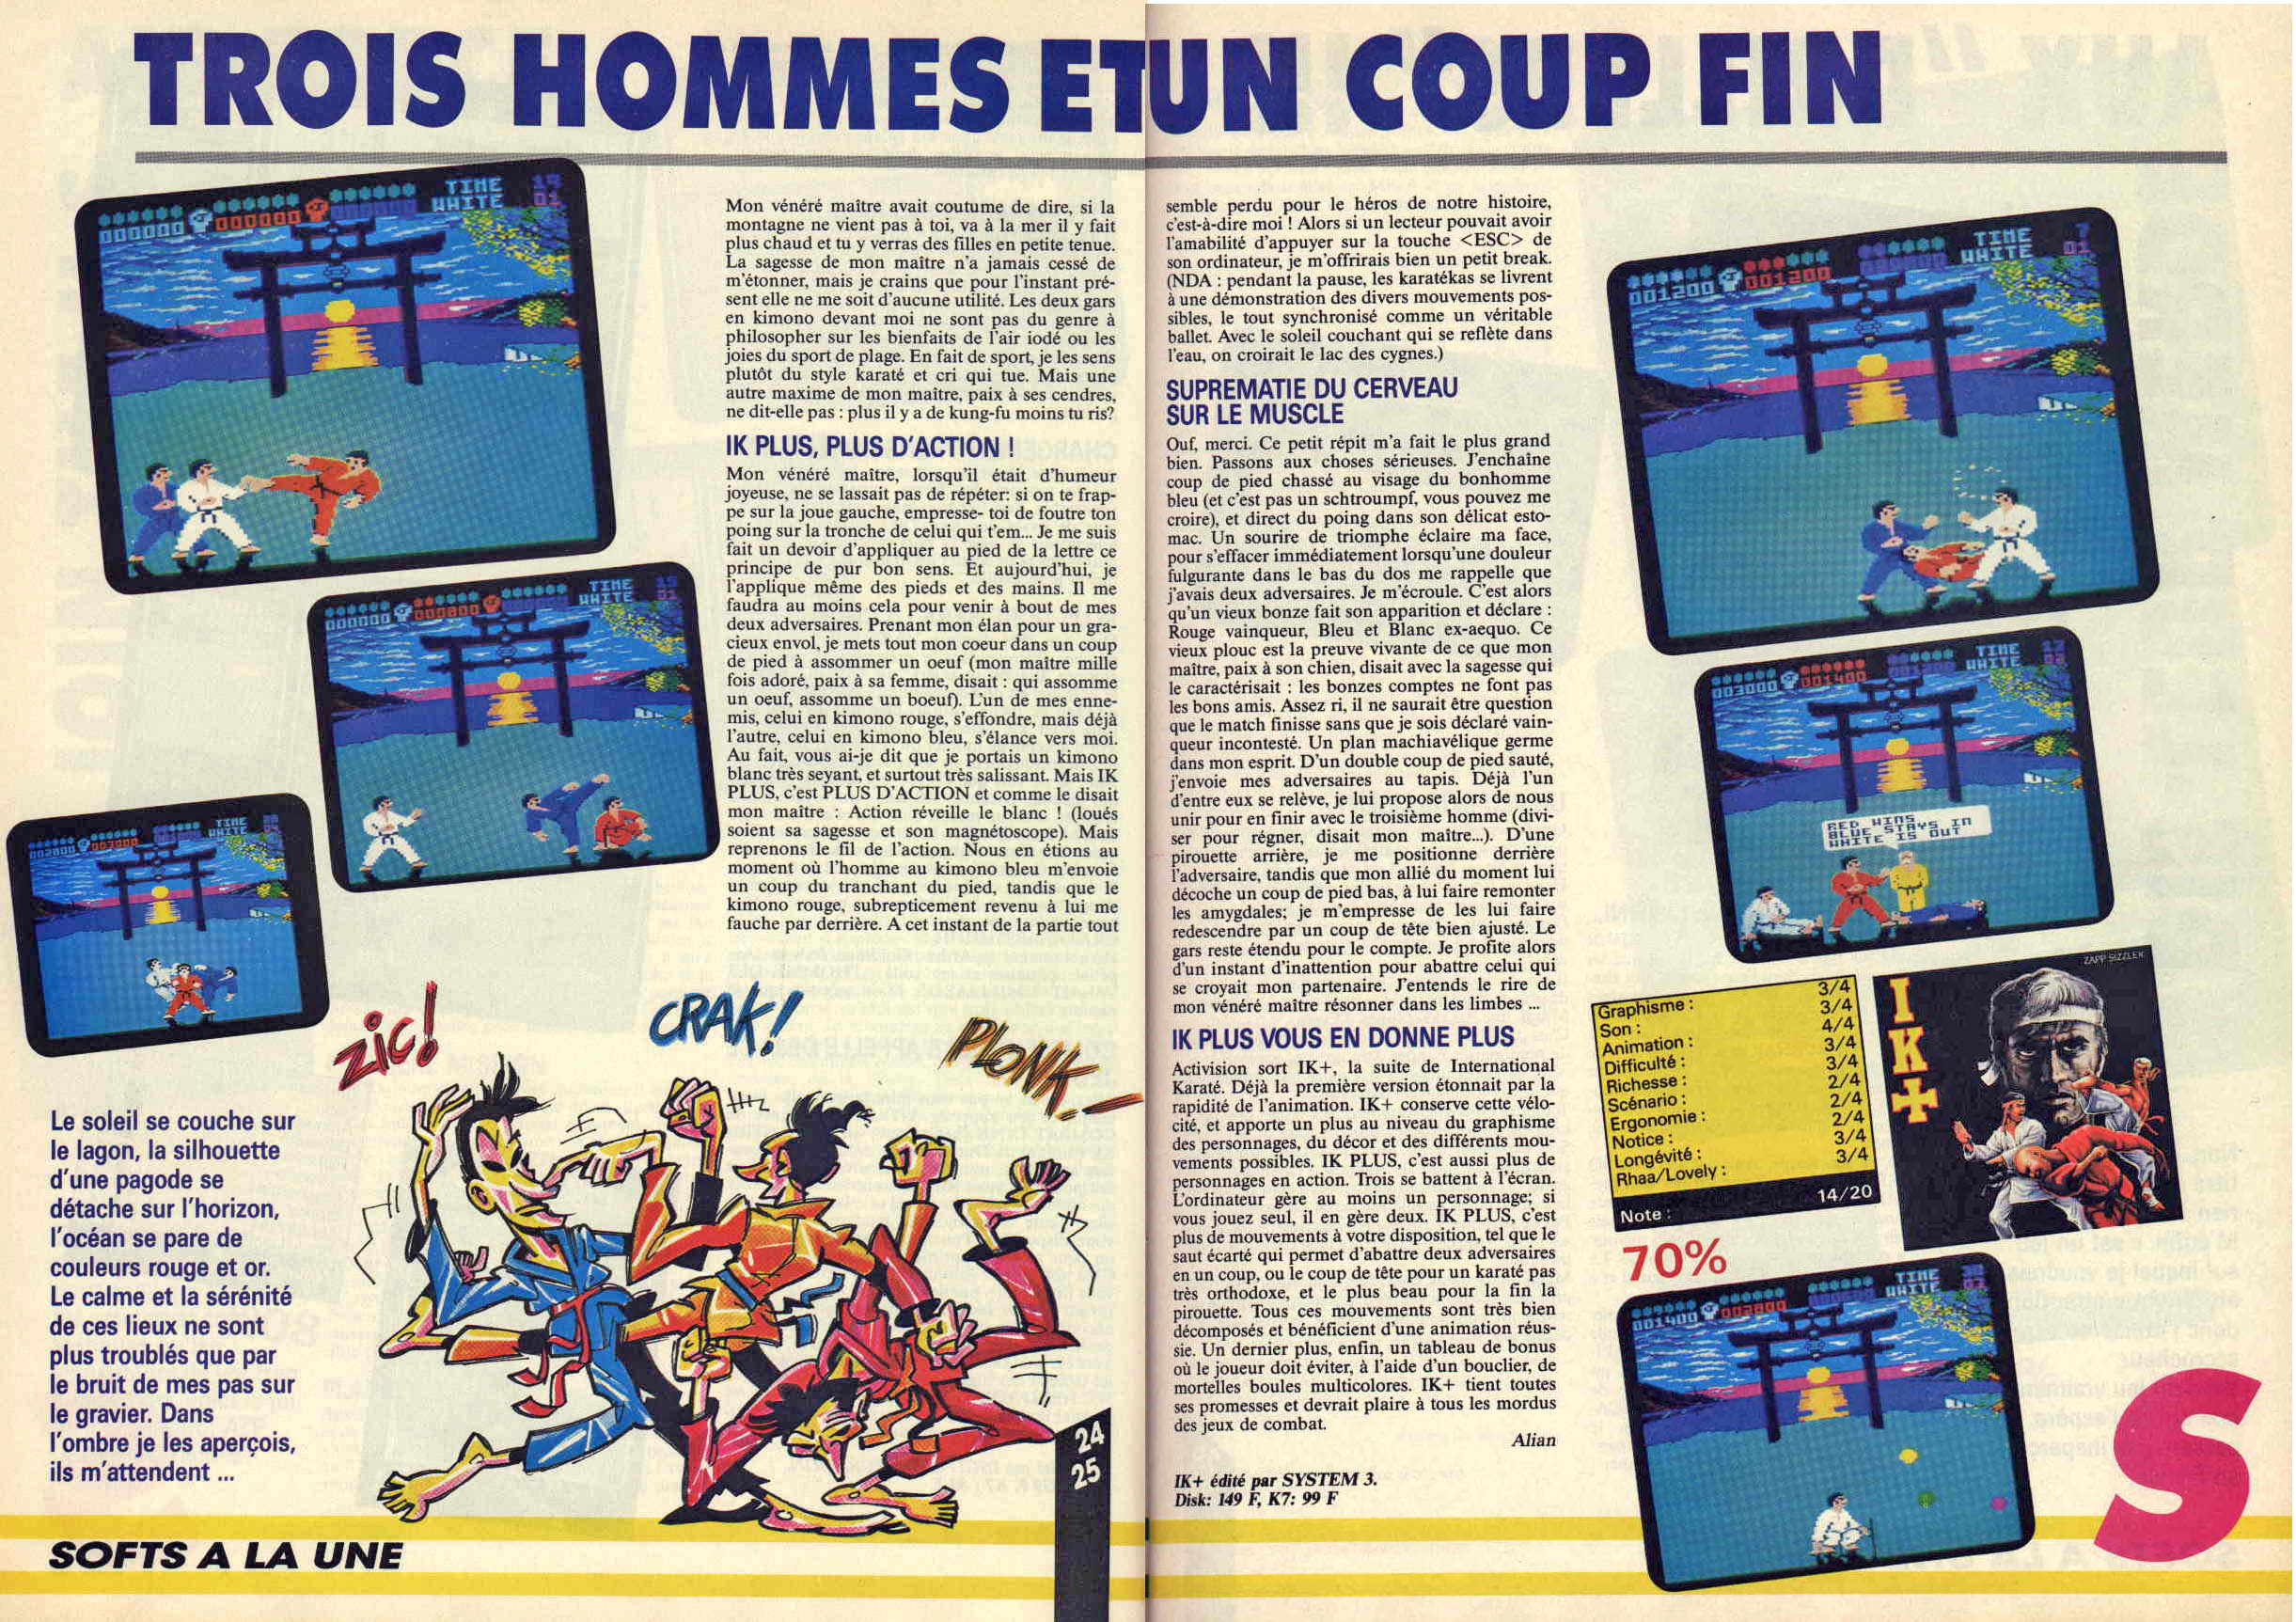 amstrad_100_pour_cent_-_n_2_-_marzo_-_1988.jpg